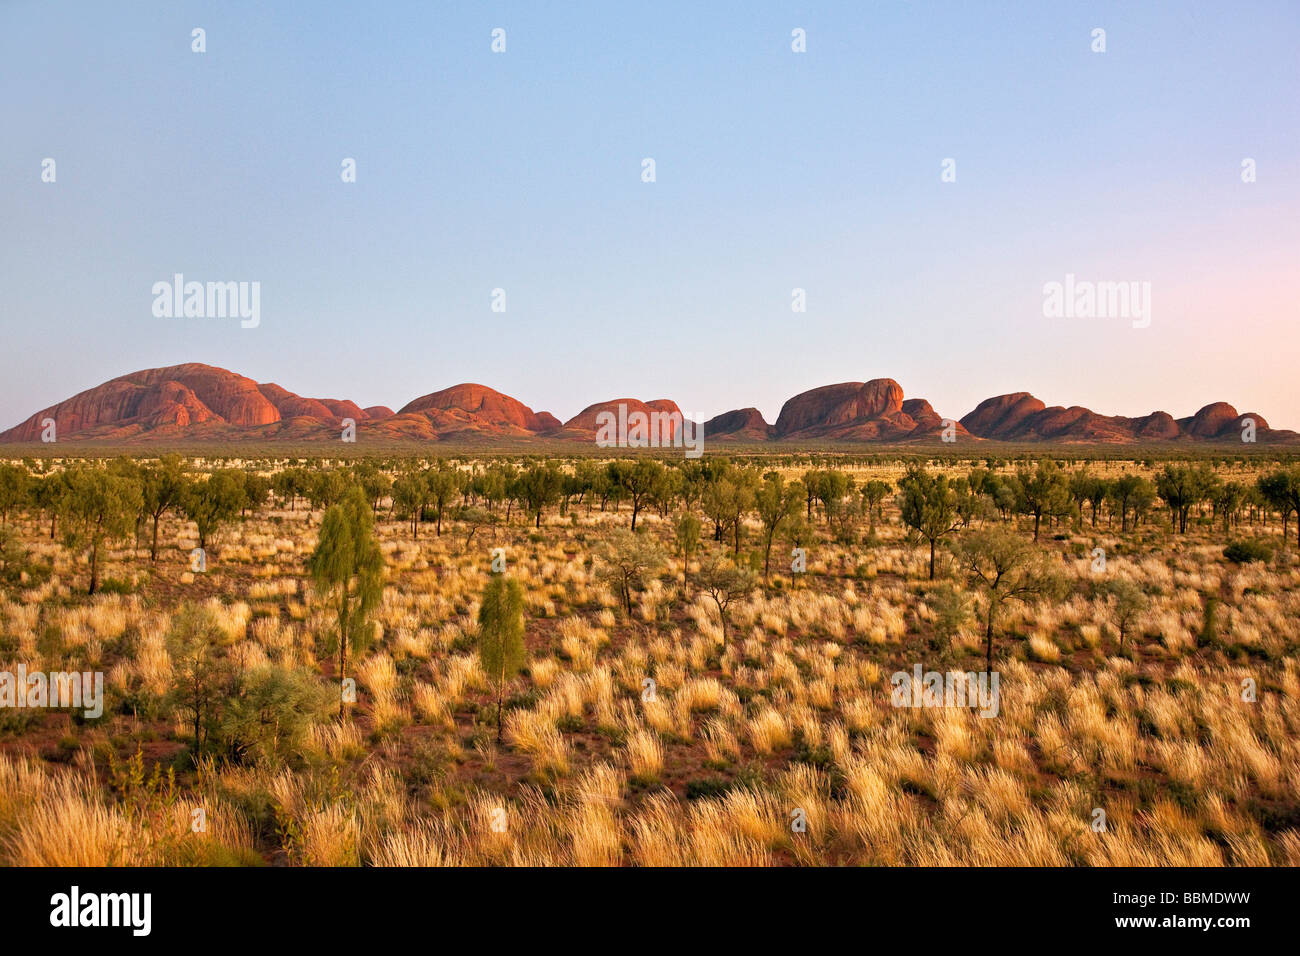 Australia, Northern Territory. The Olgas, otherwise known as Kata Tjuta (meaning 'many heads' ), at sunrise. Stock Photo